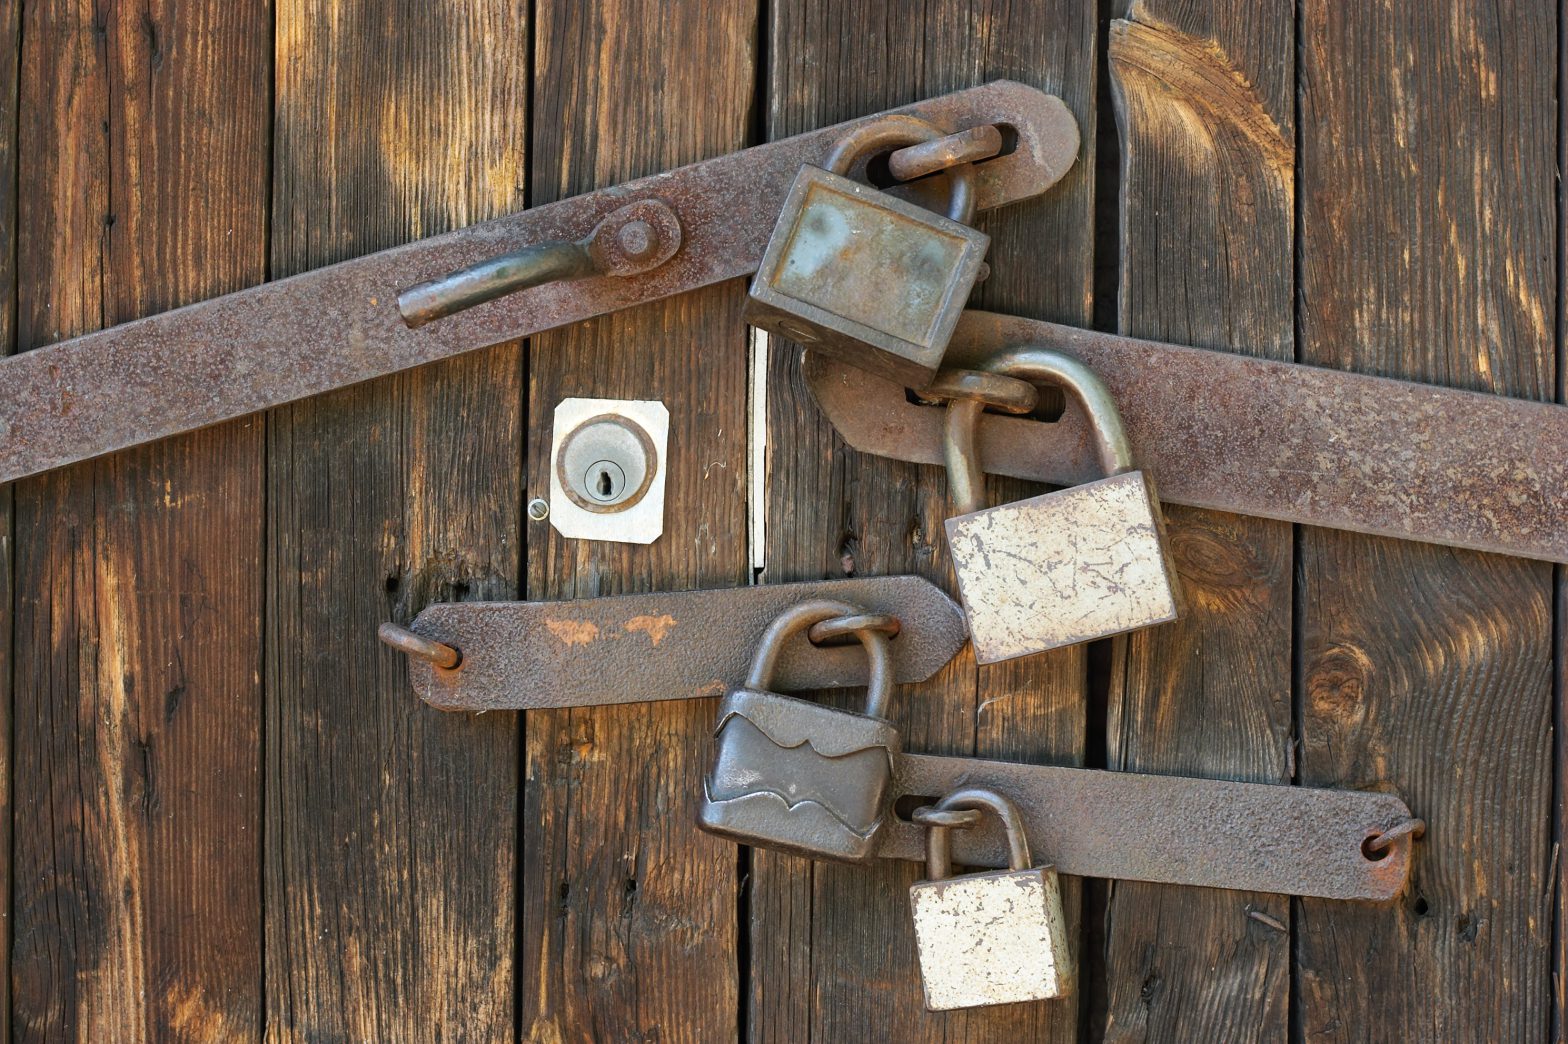 What Is Encryption, and Why Should I (or My Customers) Care?